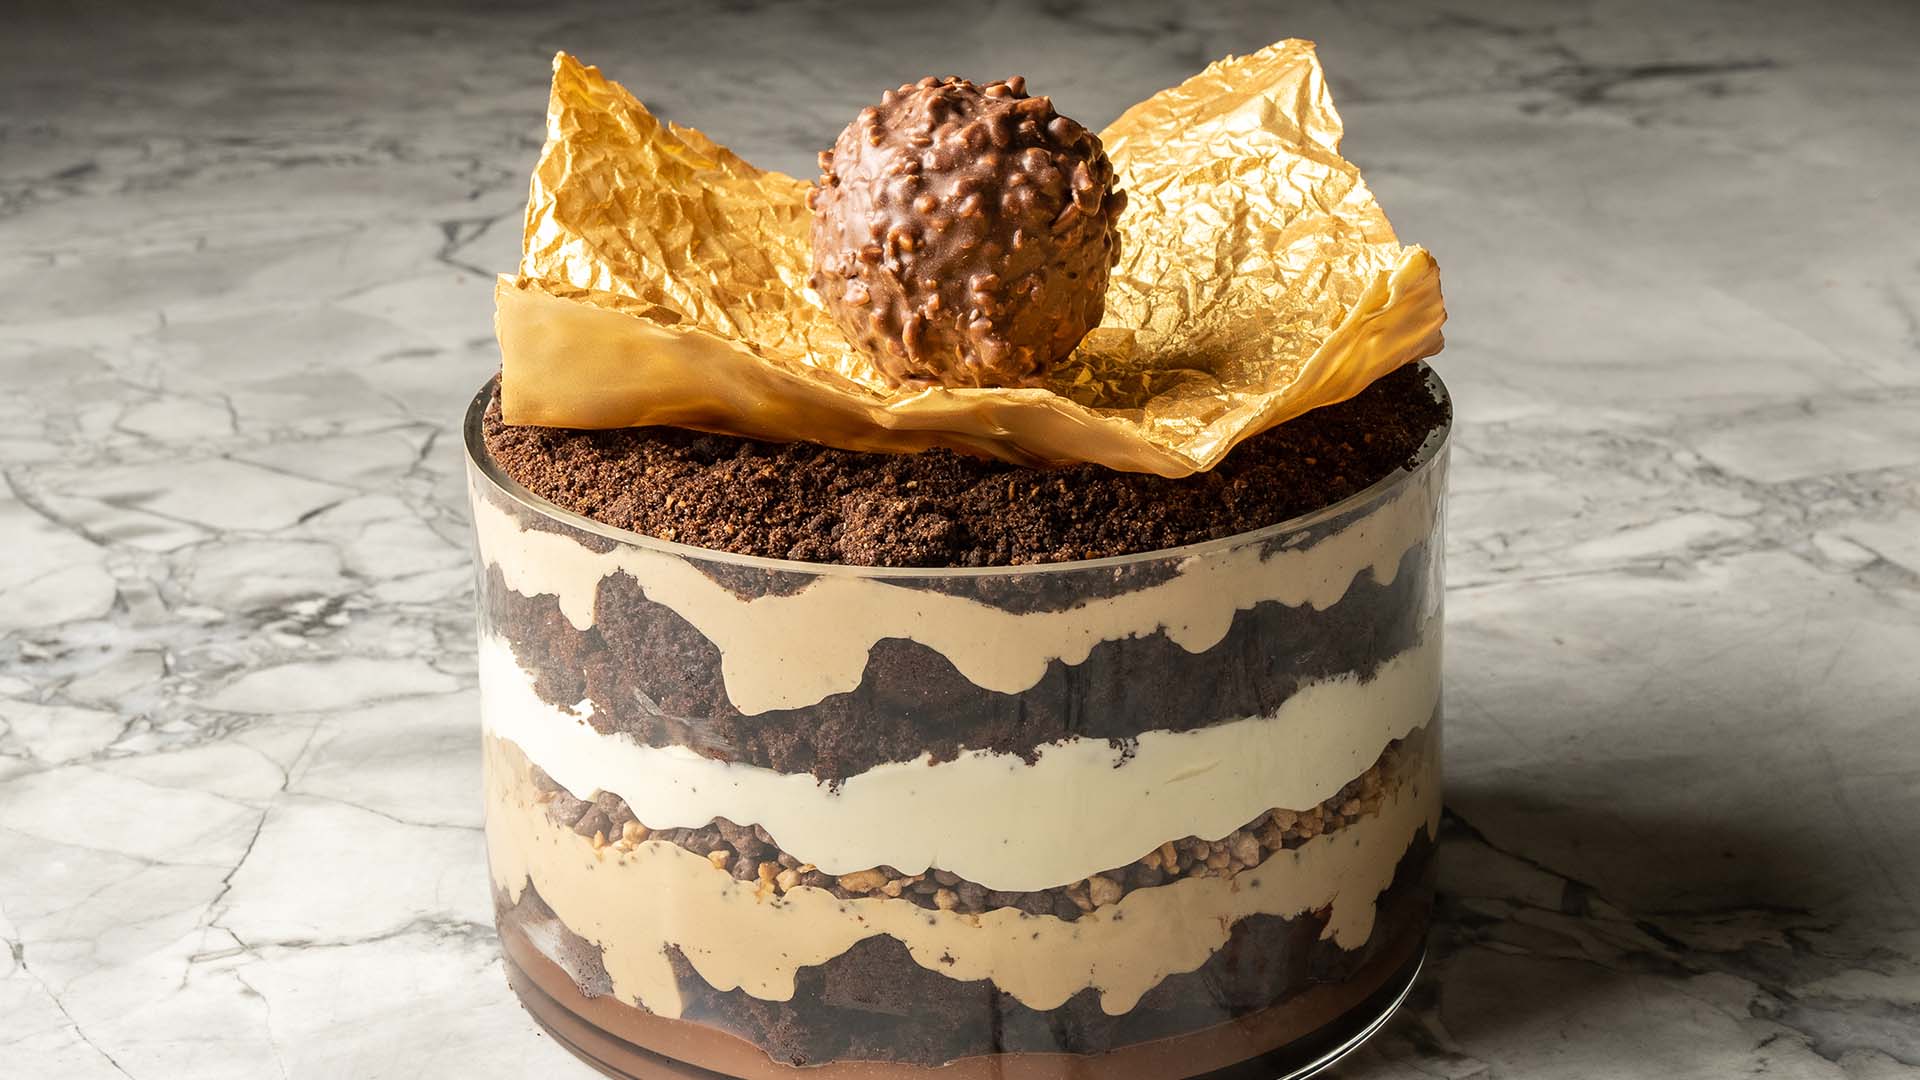 Messina Is Releasing a Gold-Topped Choc-Hazelnut Trifle to Level Up Your Christmas Lunch